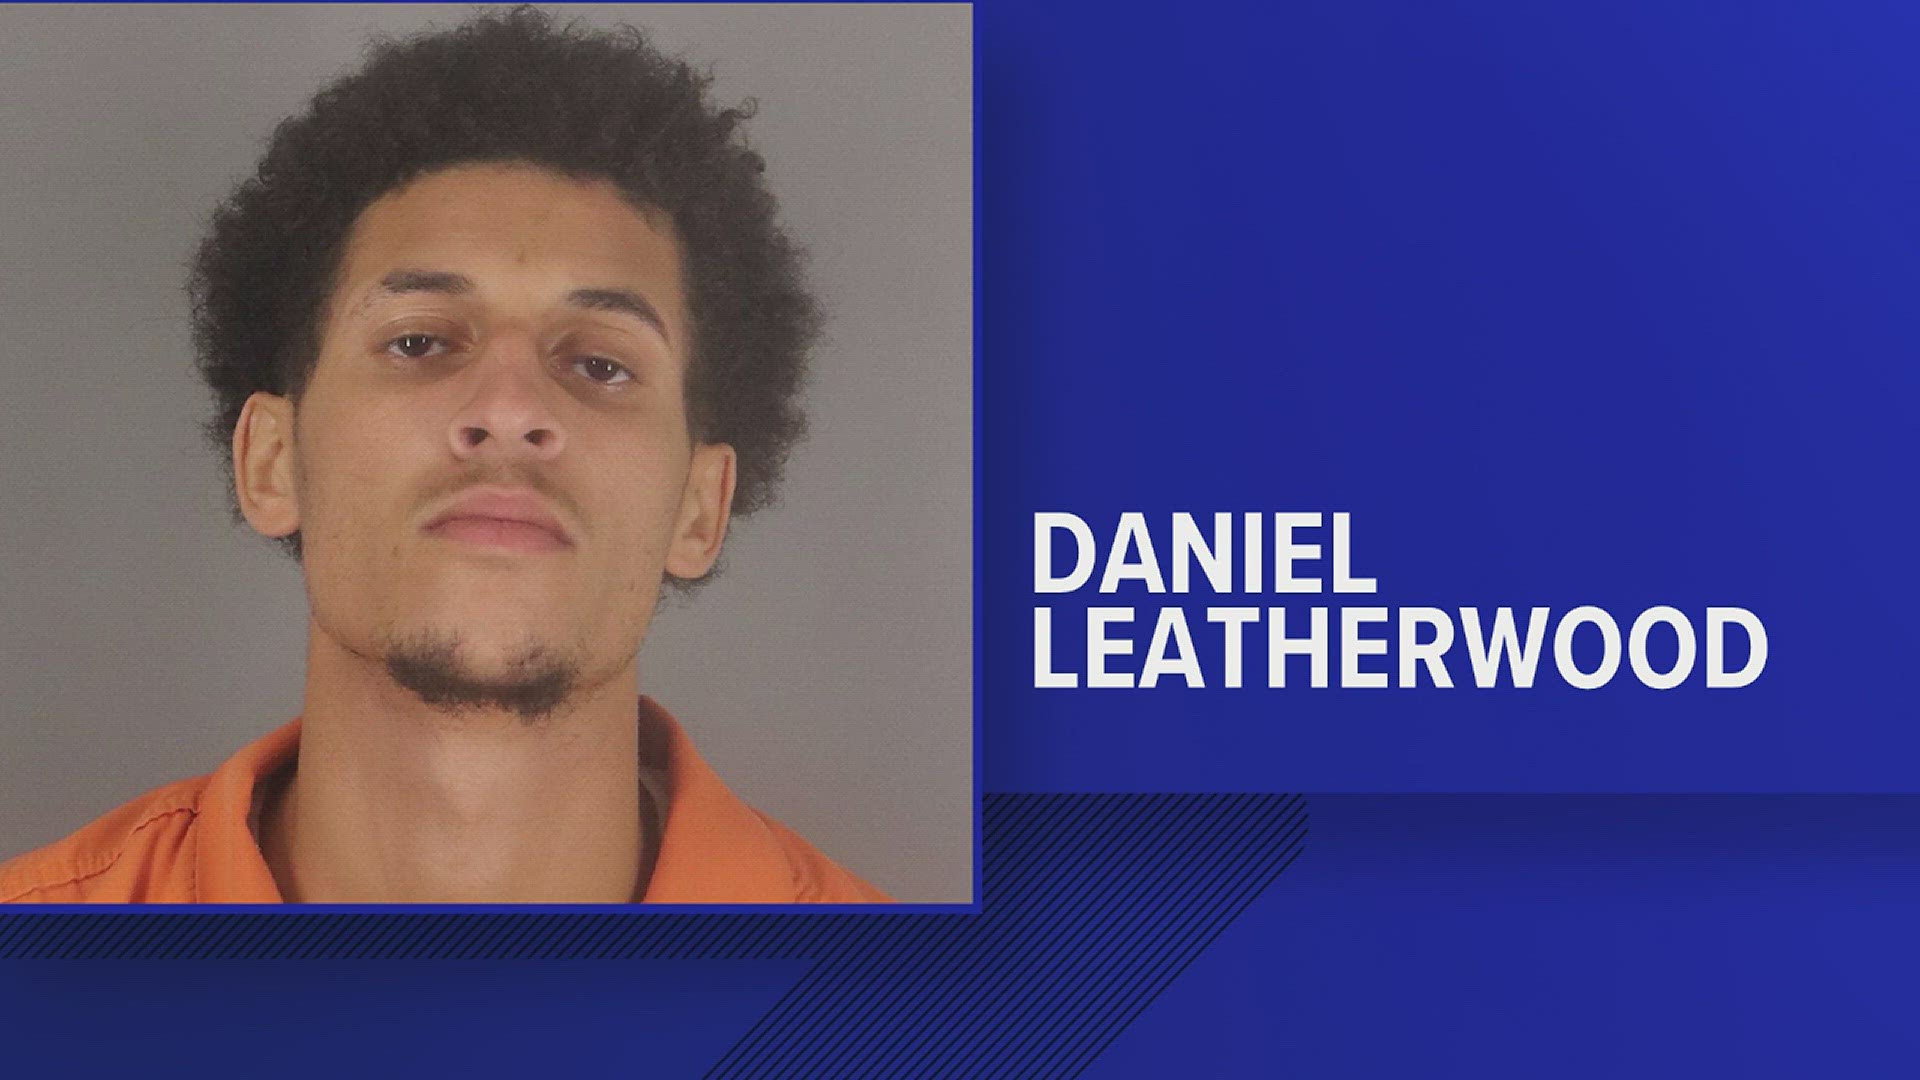 21-year-old Daniel Leatherwood pleaded guilty to the Hobbs Act robbery and brandishing a firearm during a crime of violence.